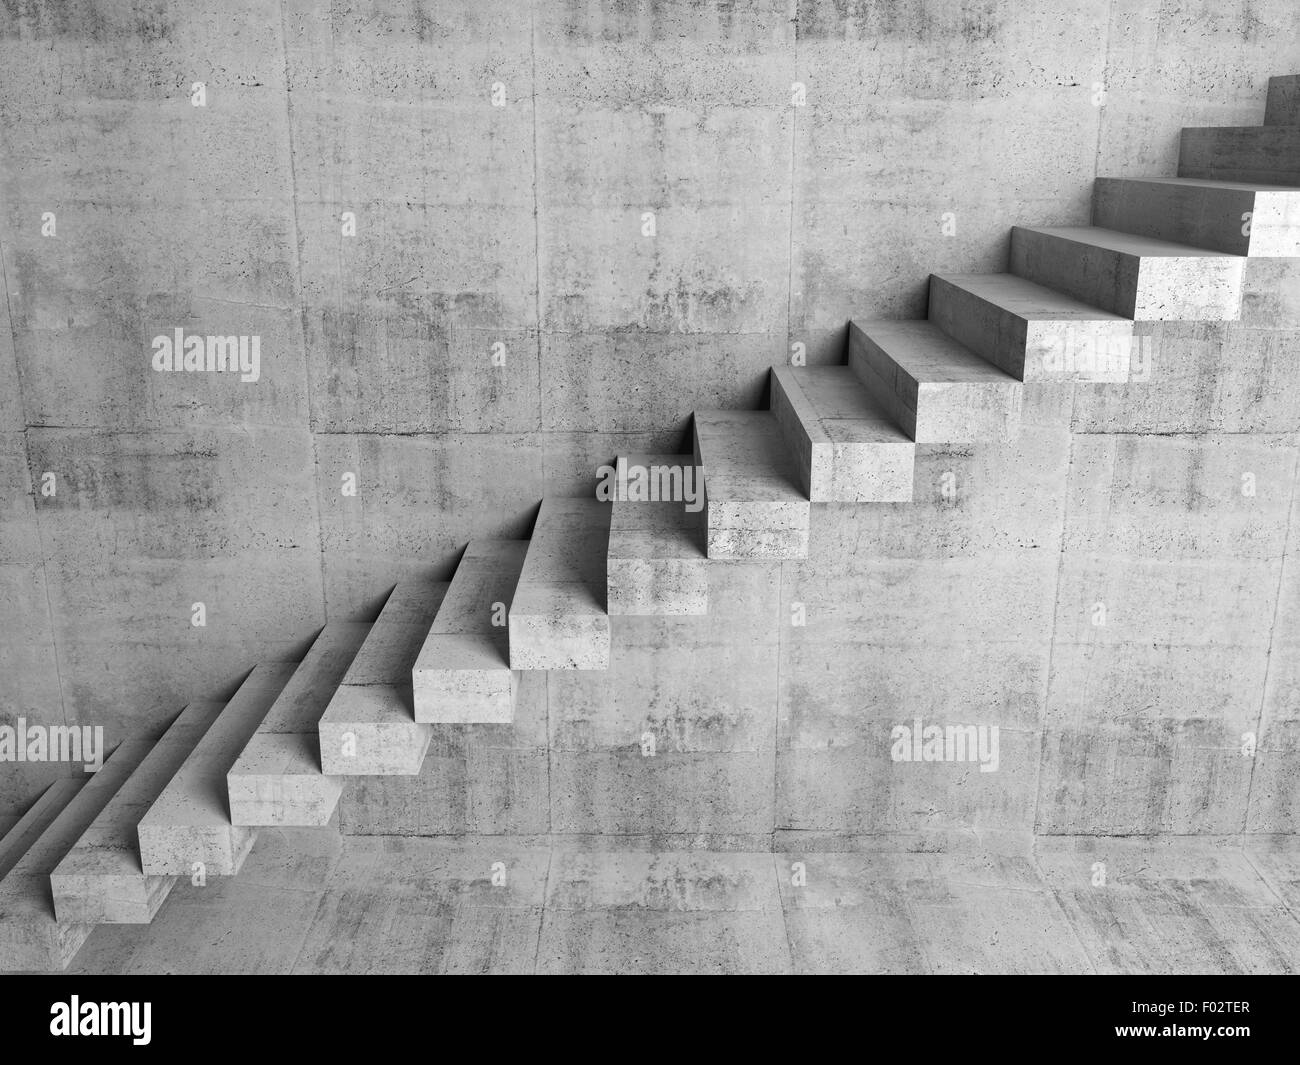 Abstract concrete interior fragment, cantilevered stairs on the wall, digital 3d illustration Stock Photo